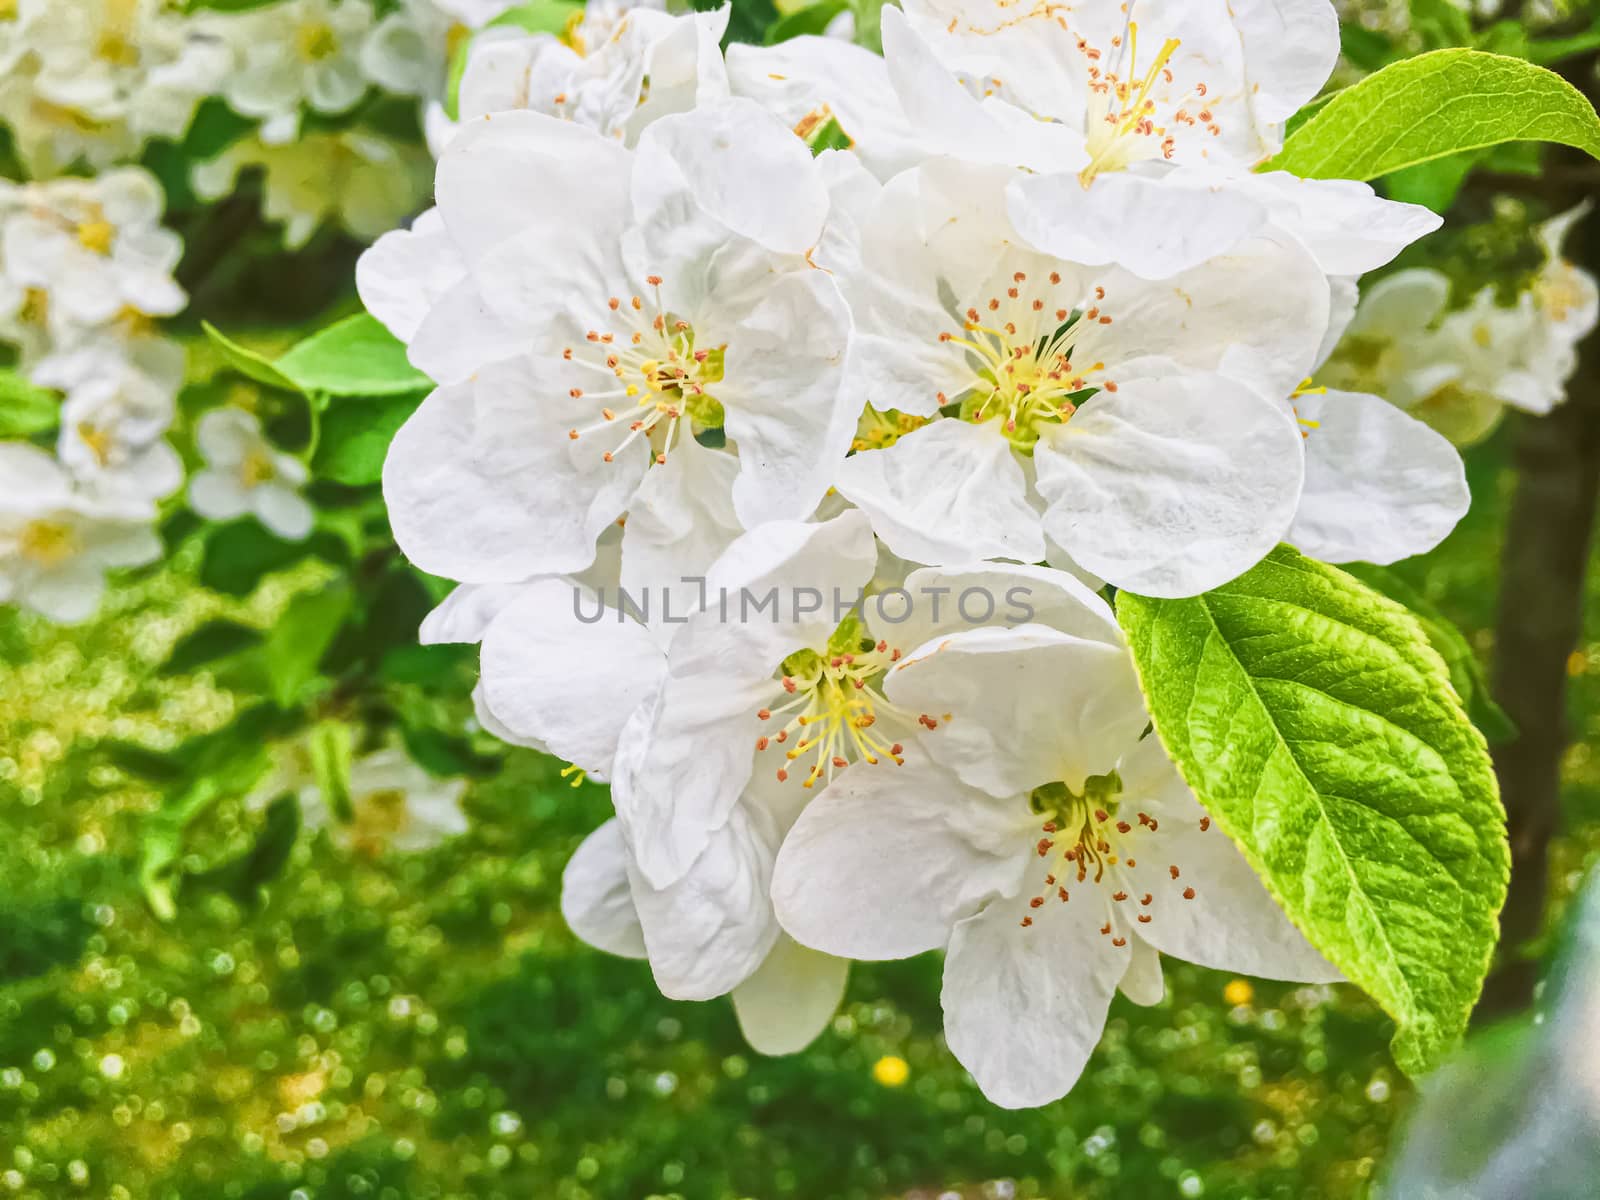 Blooming apple tree flowers in spring garden as beautiful nature landscape, plantation and agriculture scenery